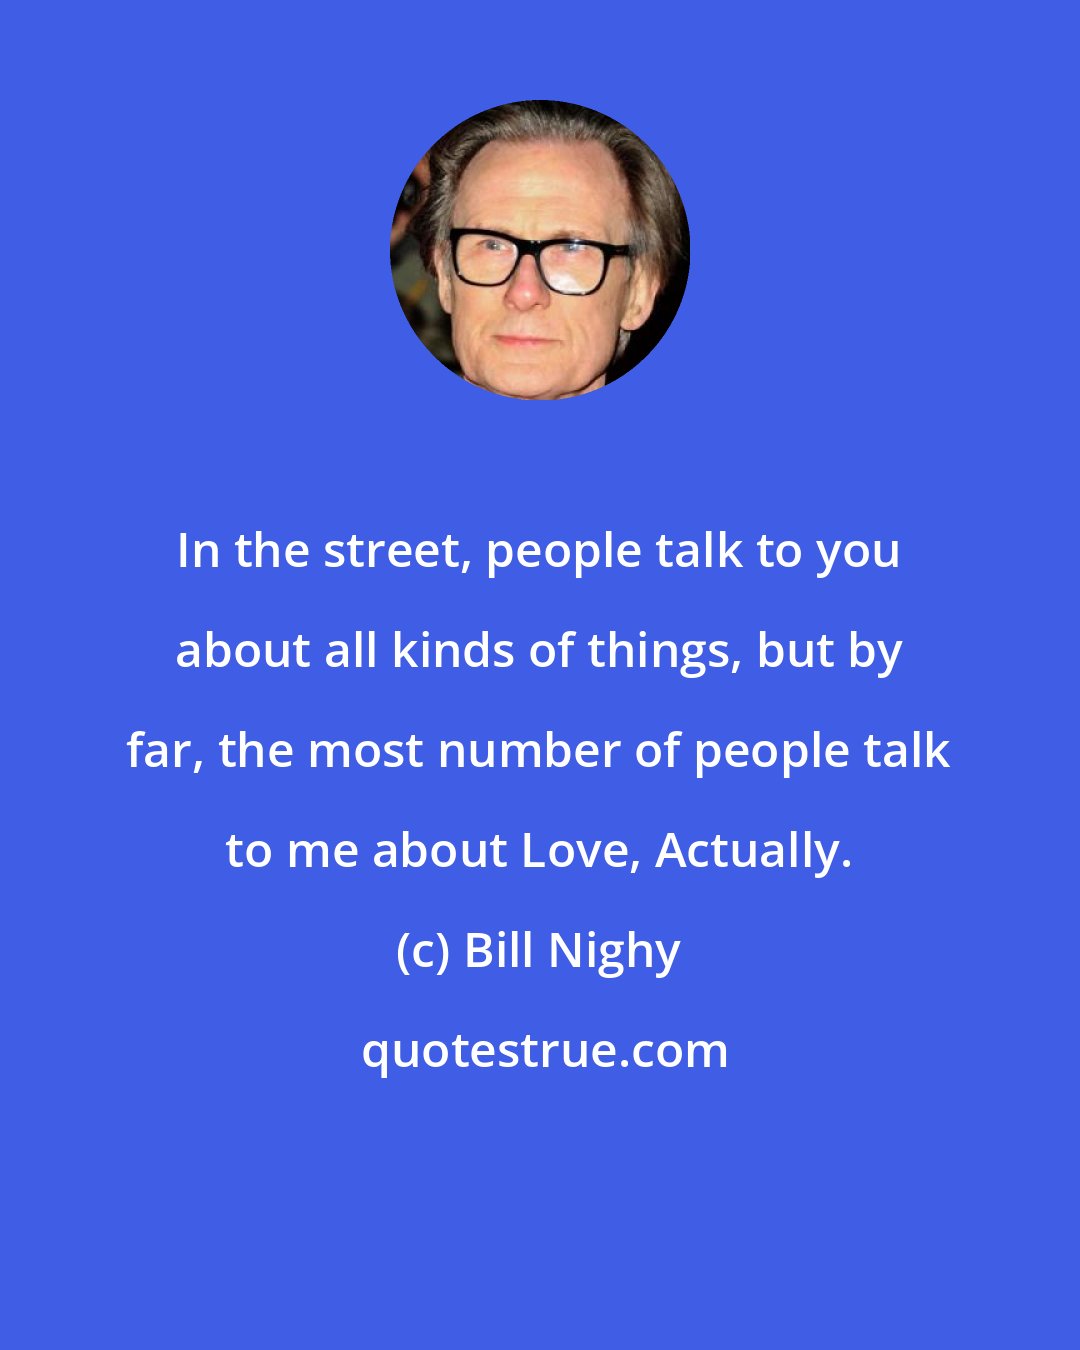 Bill Nighy: In the street, people talk to you about all kinds of things, but by far, the most number of people talk to me about Love, Actually.